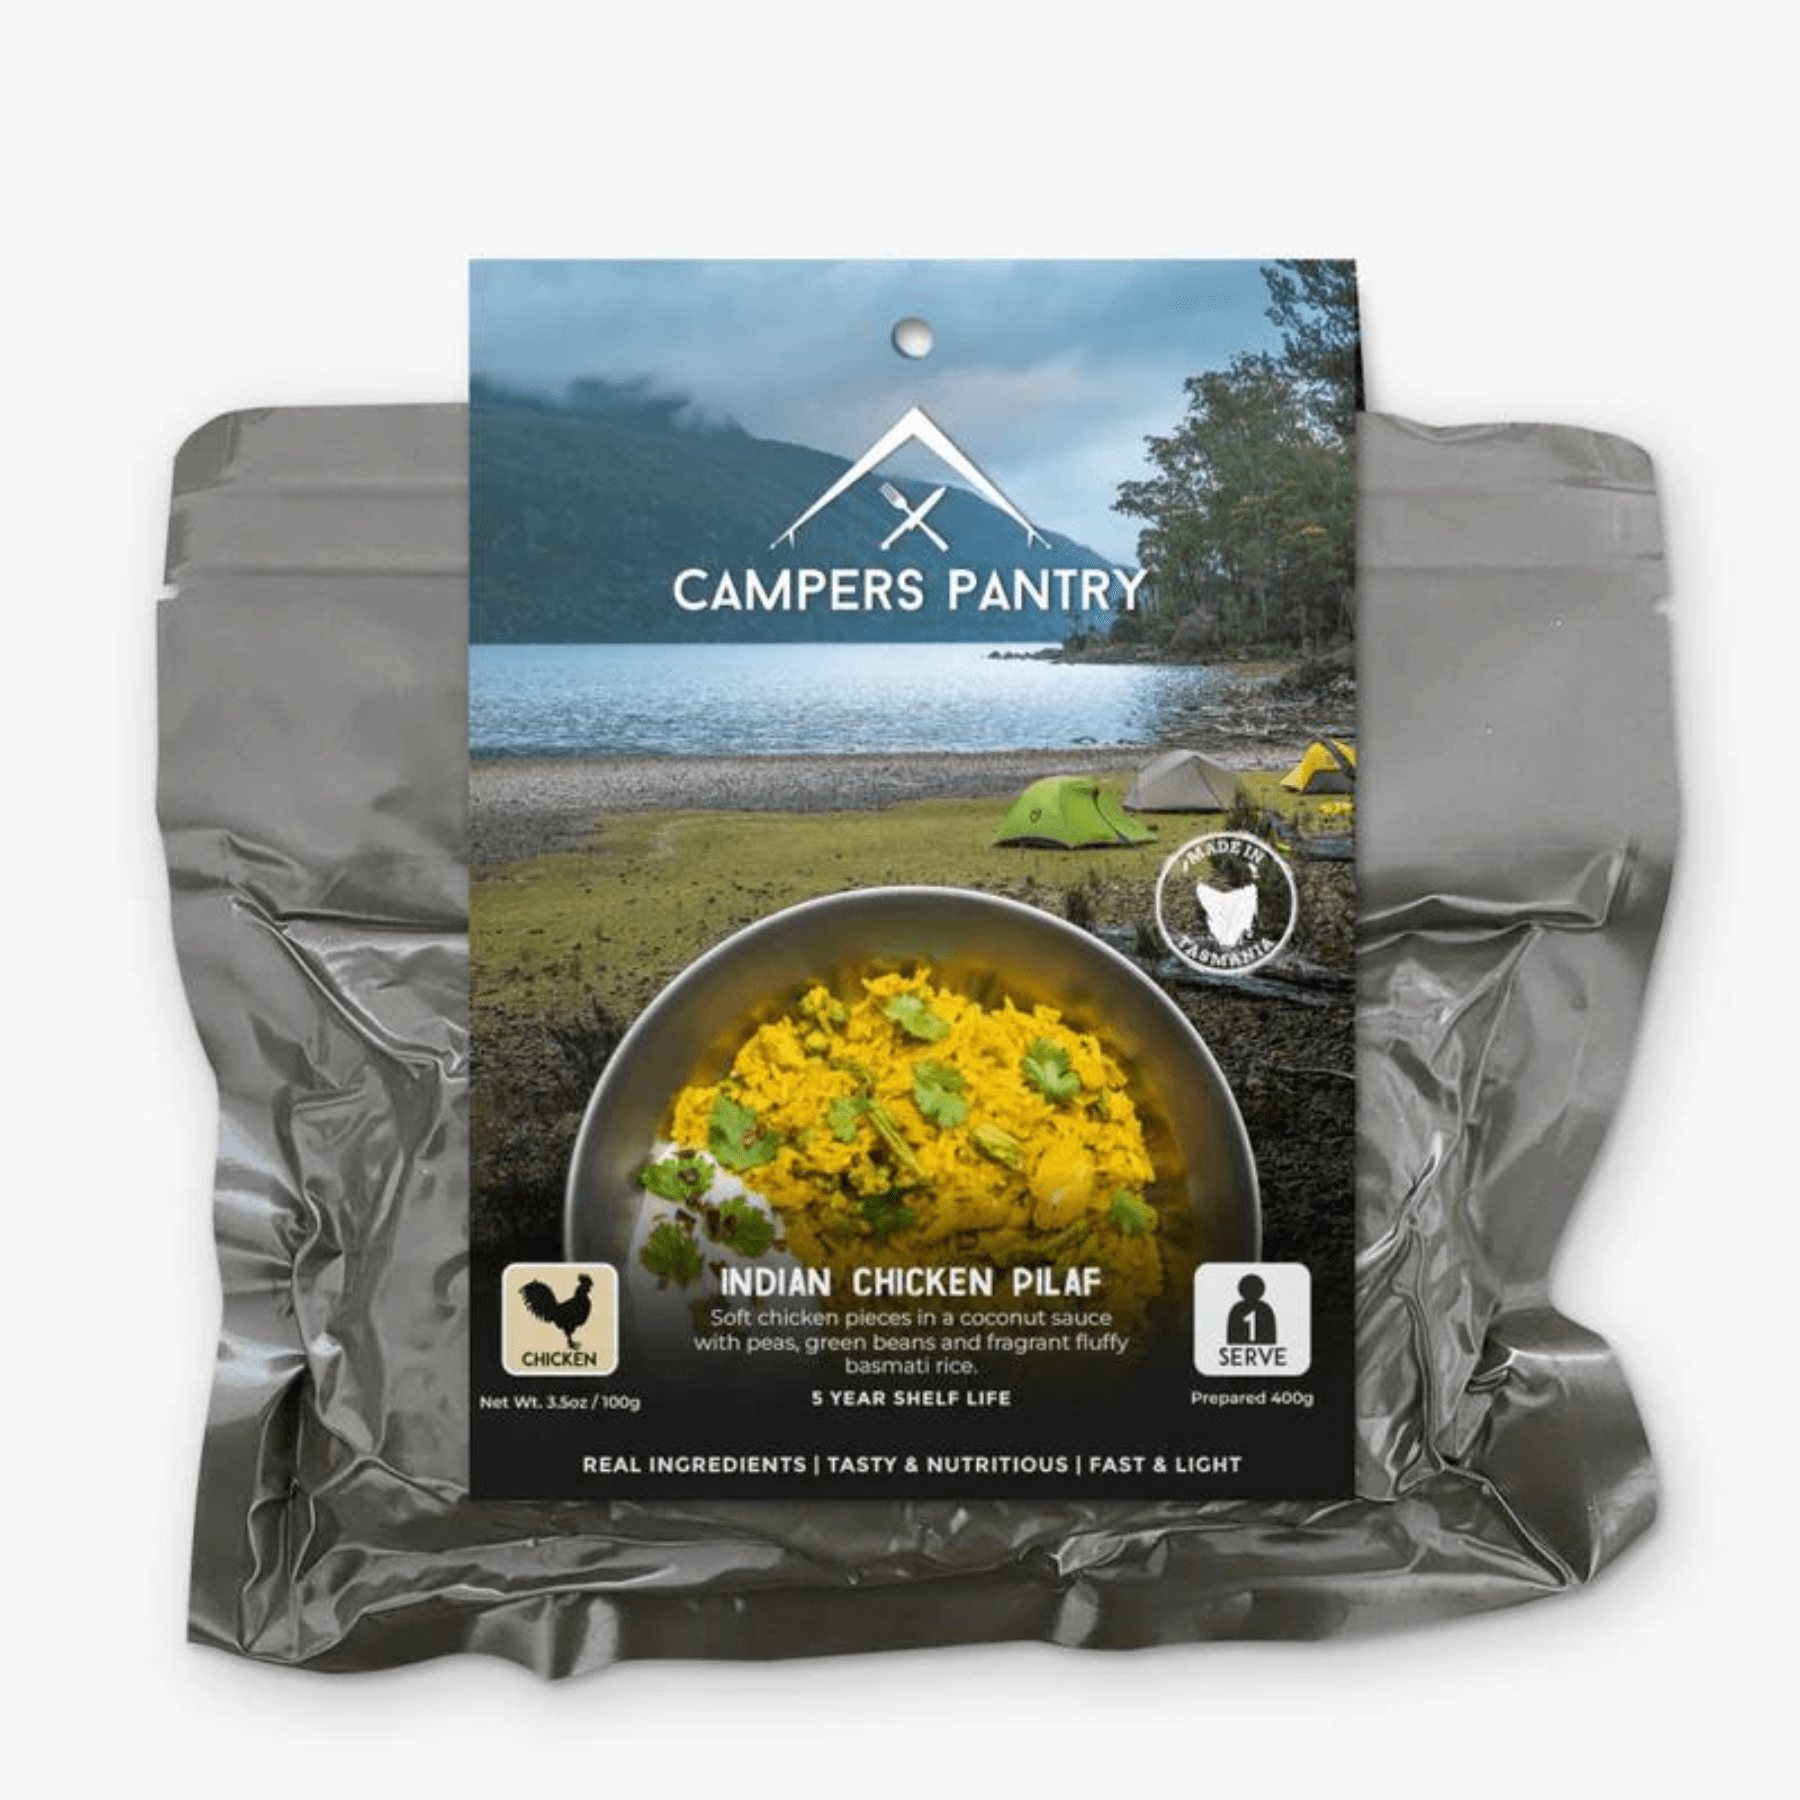 Campers Pantry Dehydrated Meals Freeze-dried Expedition Meals